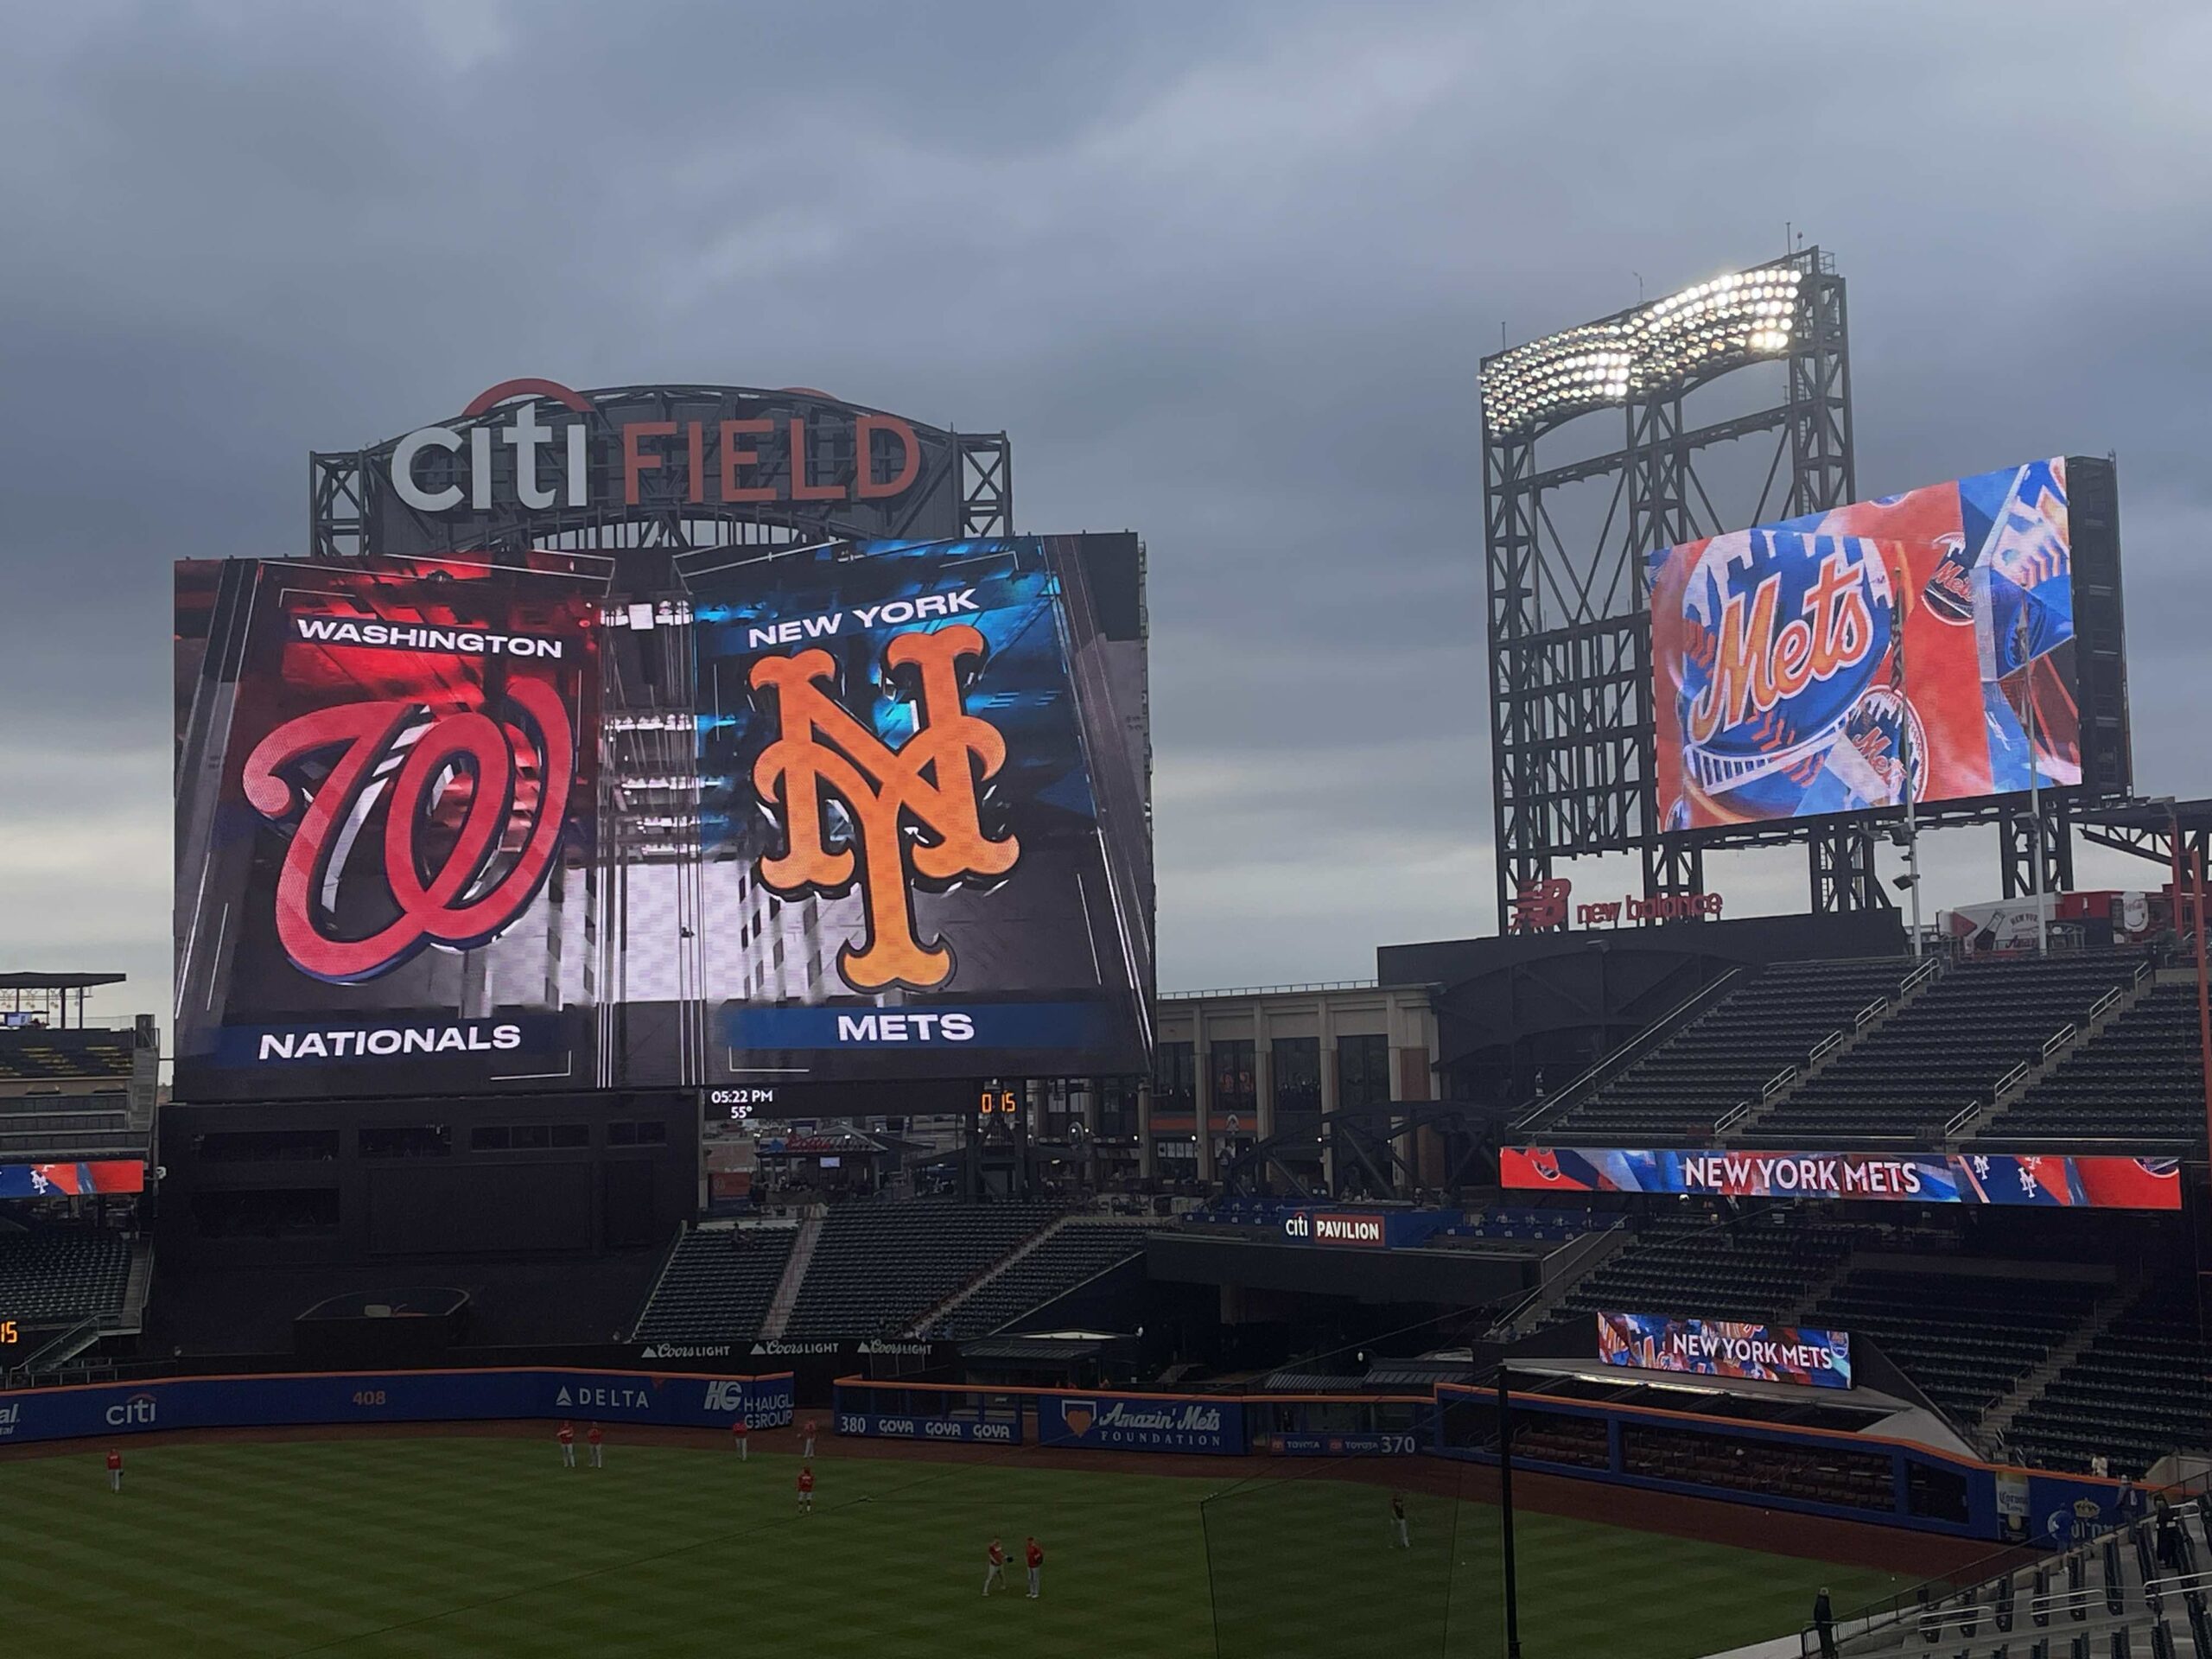 From new video technology to elevated concessions, Citi Field is